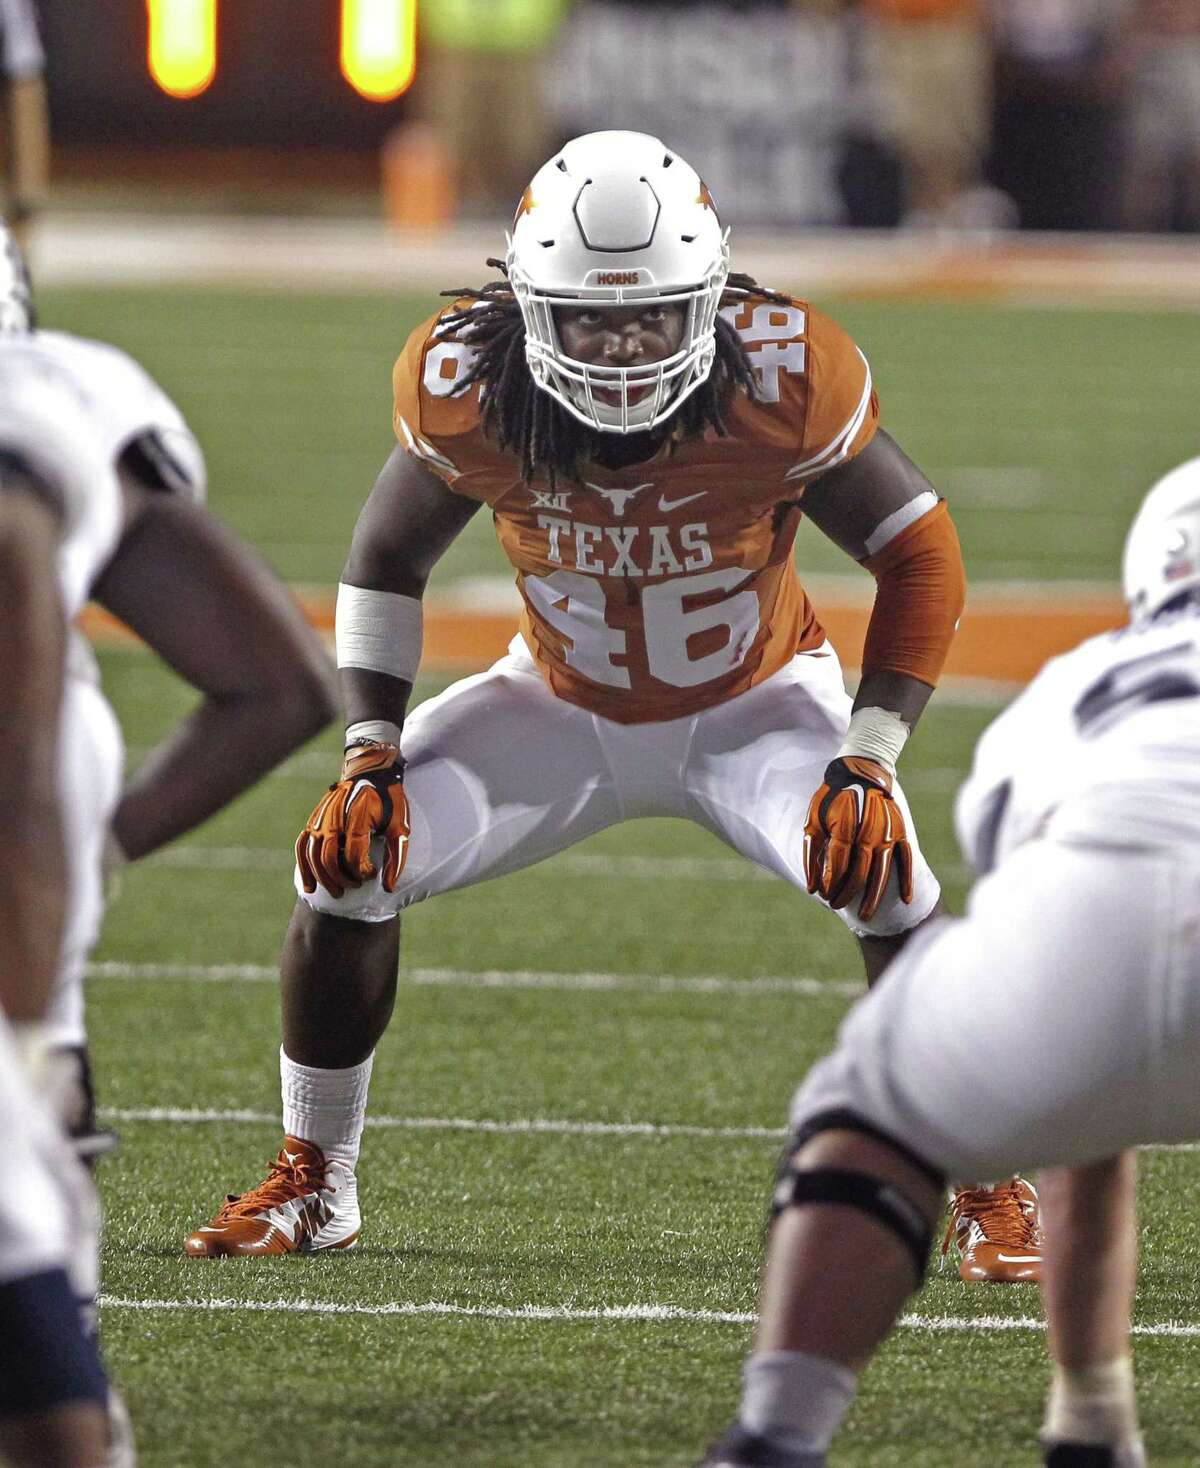 Texas’ Malik Jefferson will move back to outside linebacker after struggling last year in the middle.